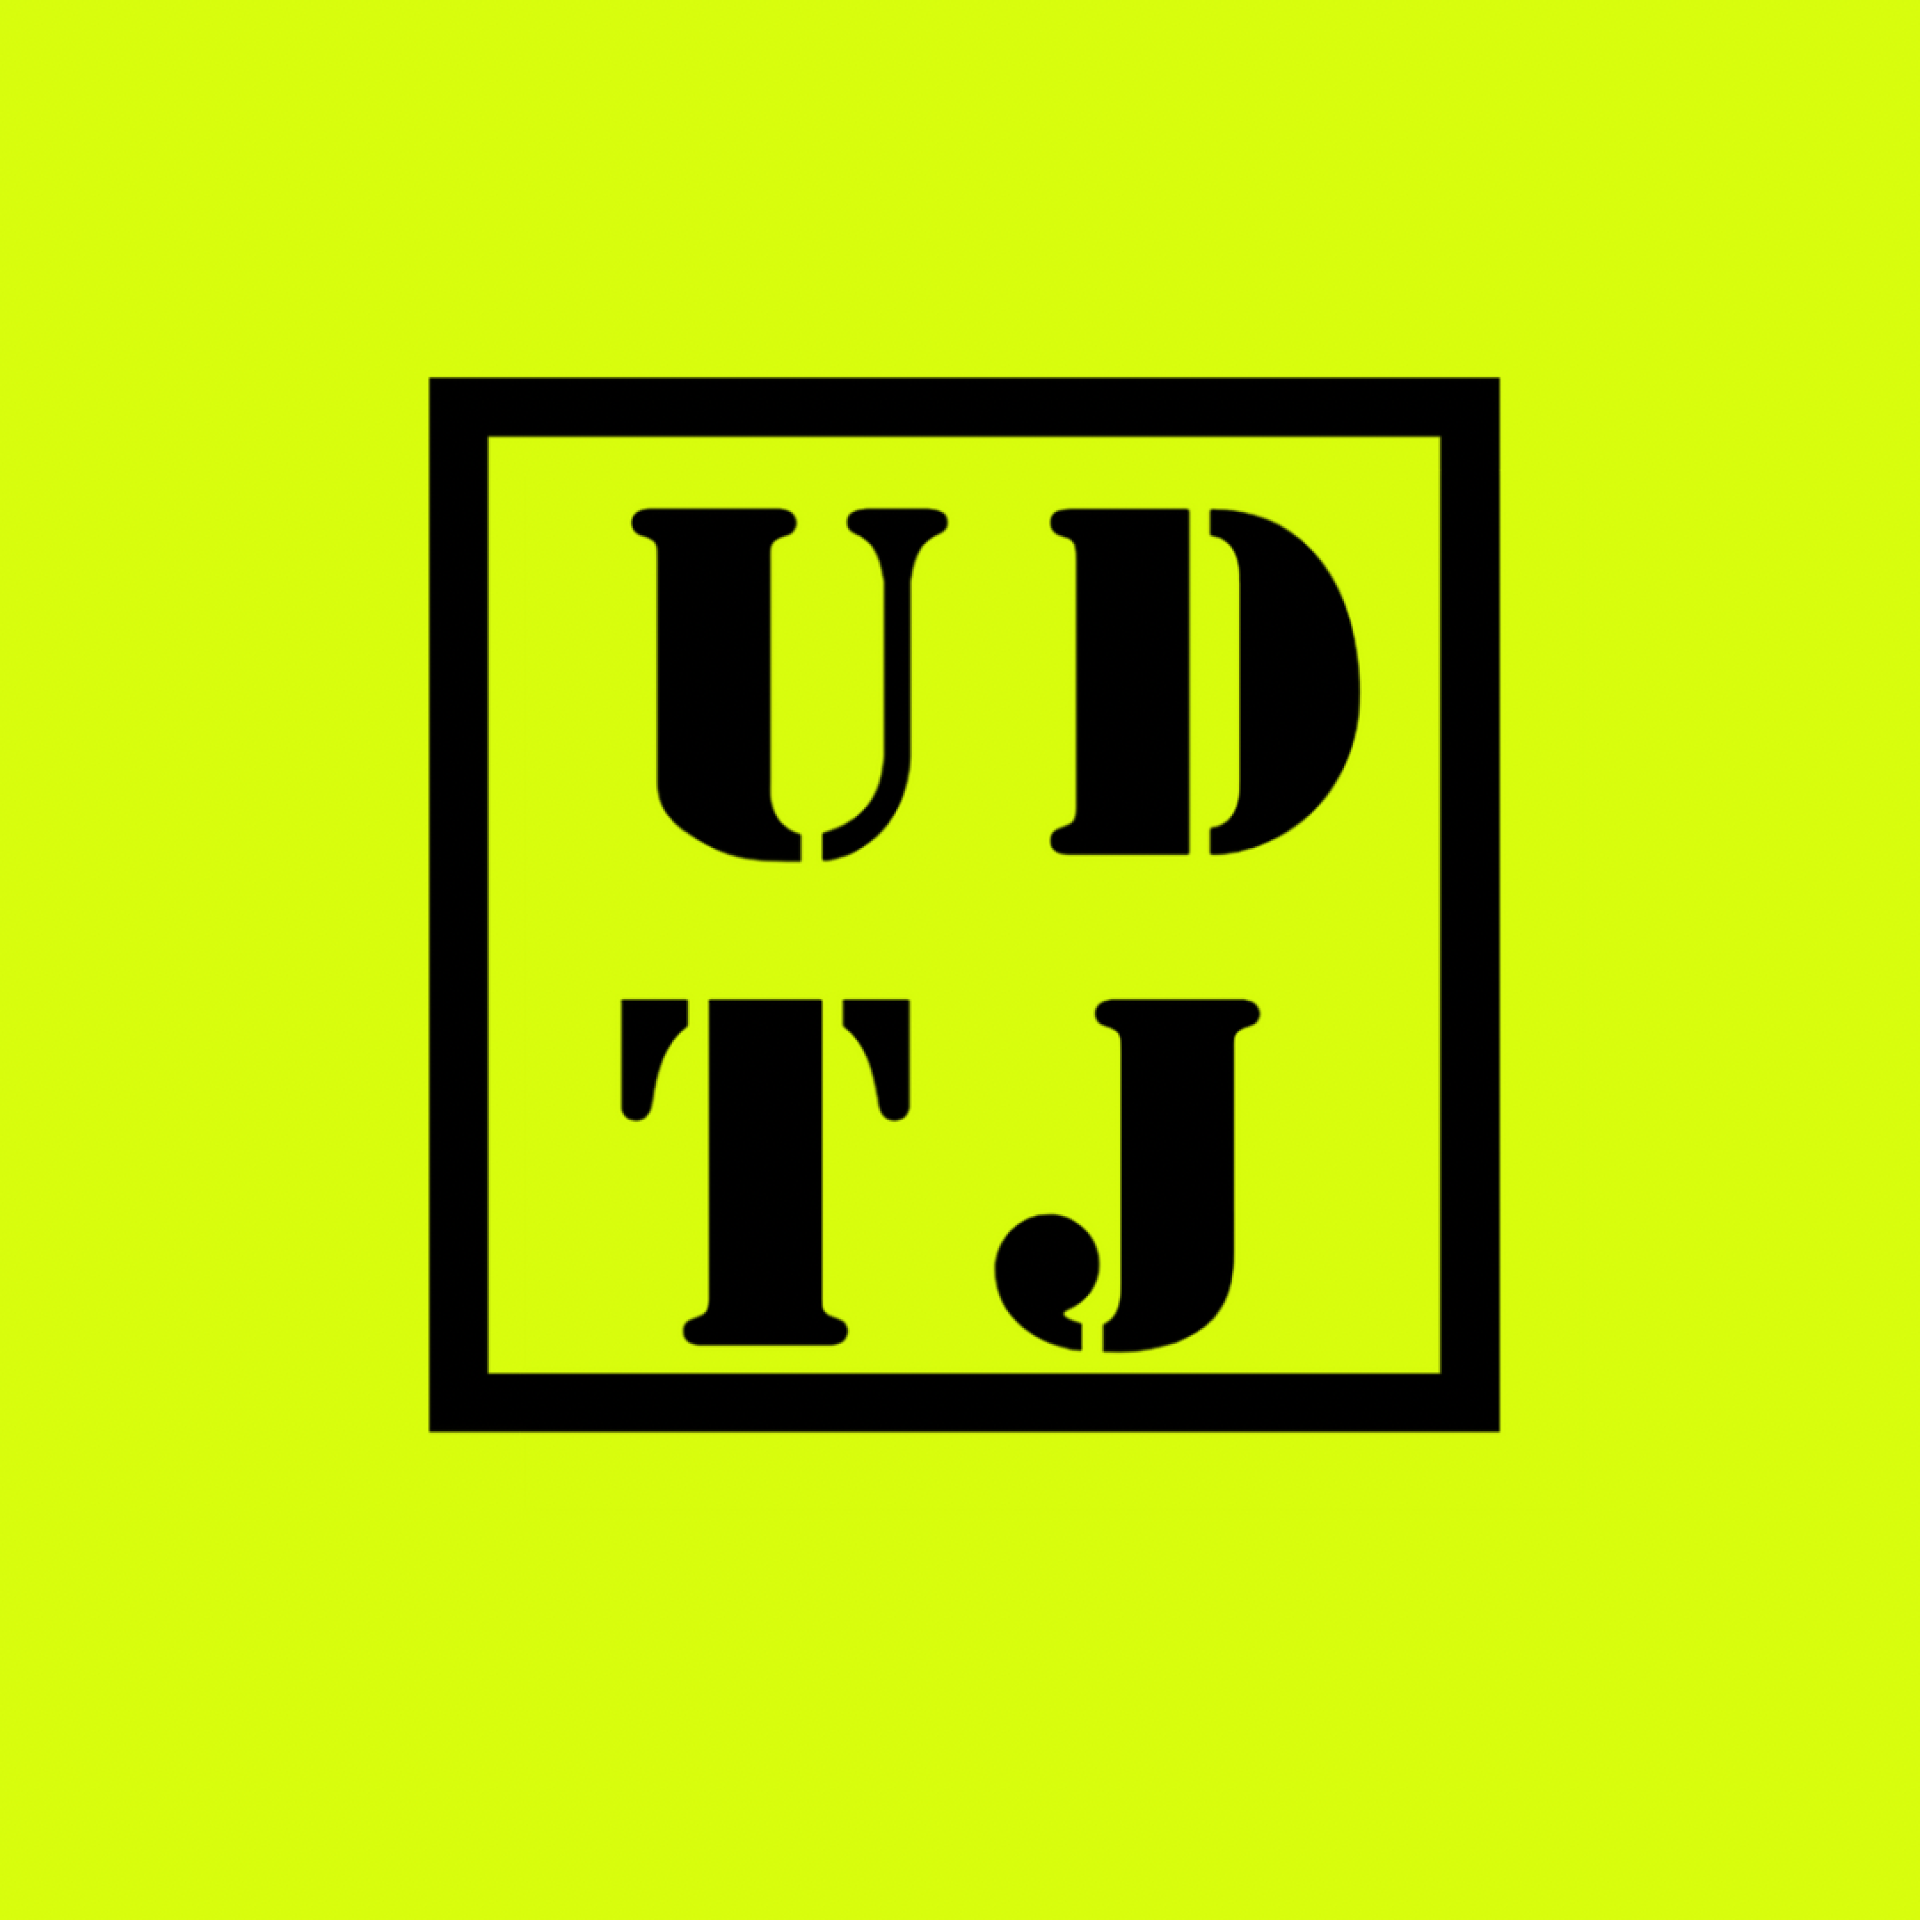 A neon green background has the letters UDTJ overlaid on top of it